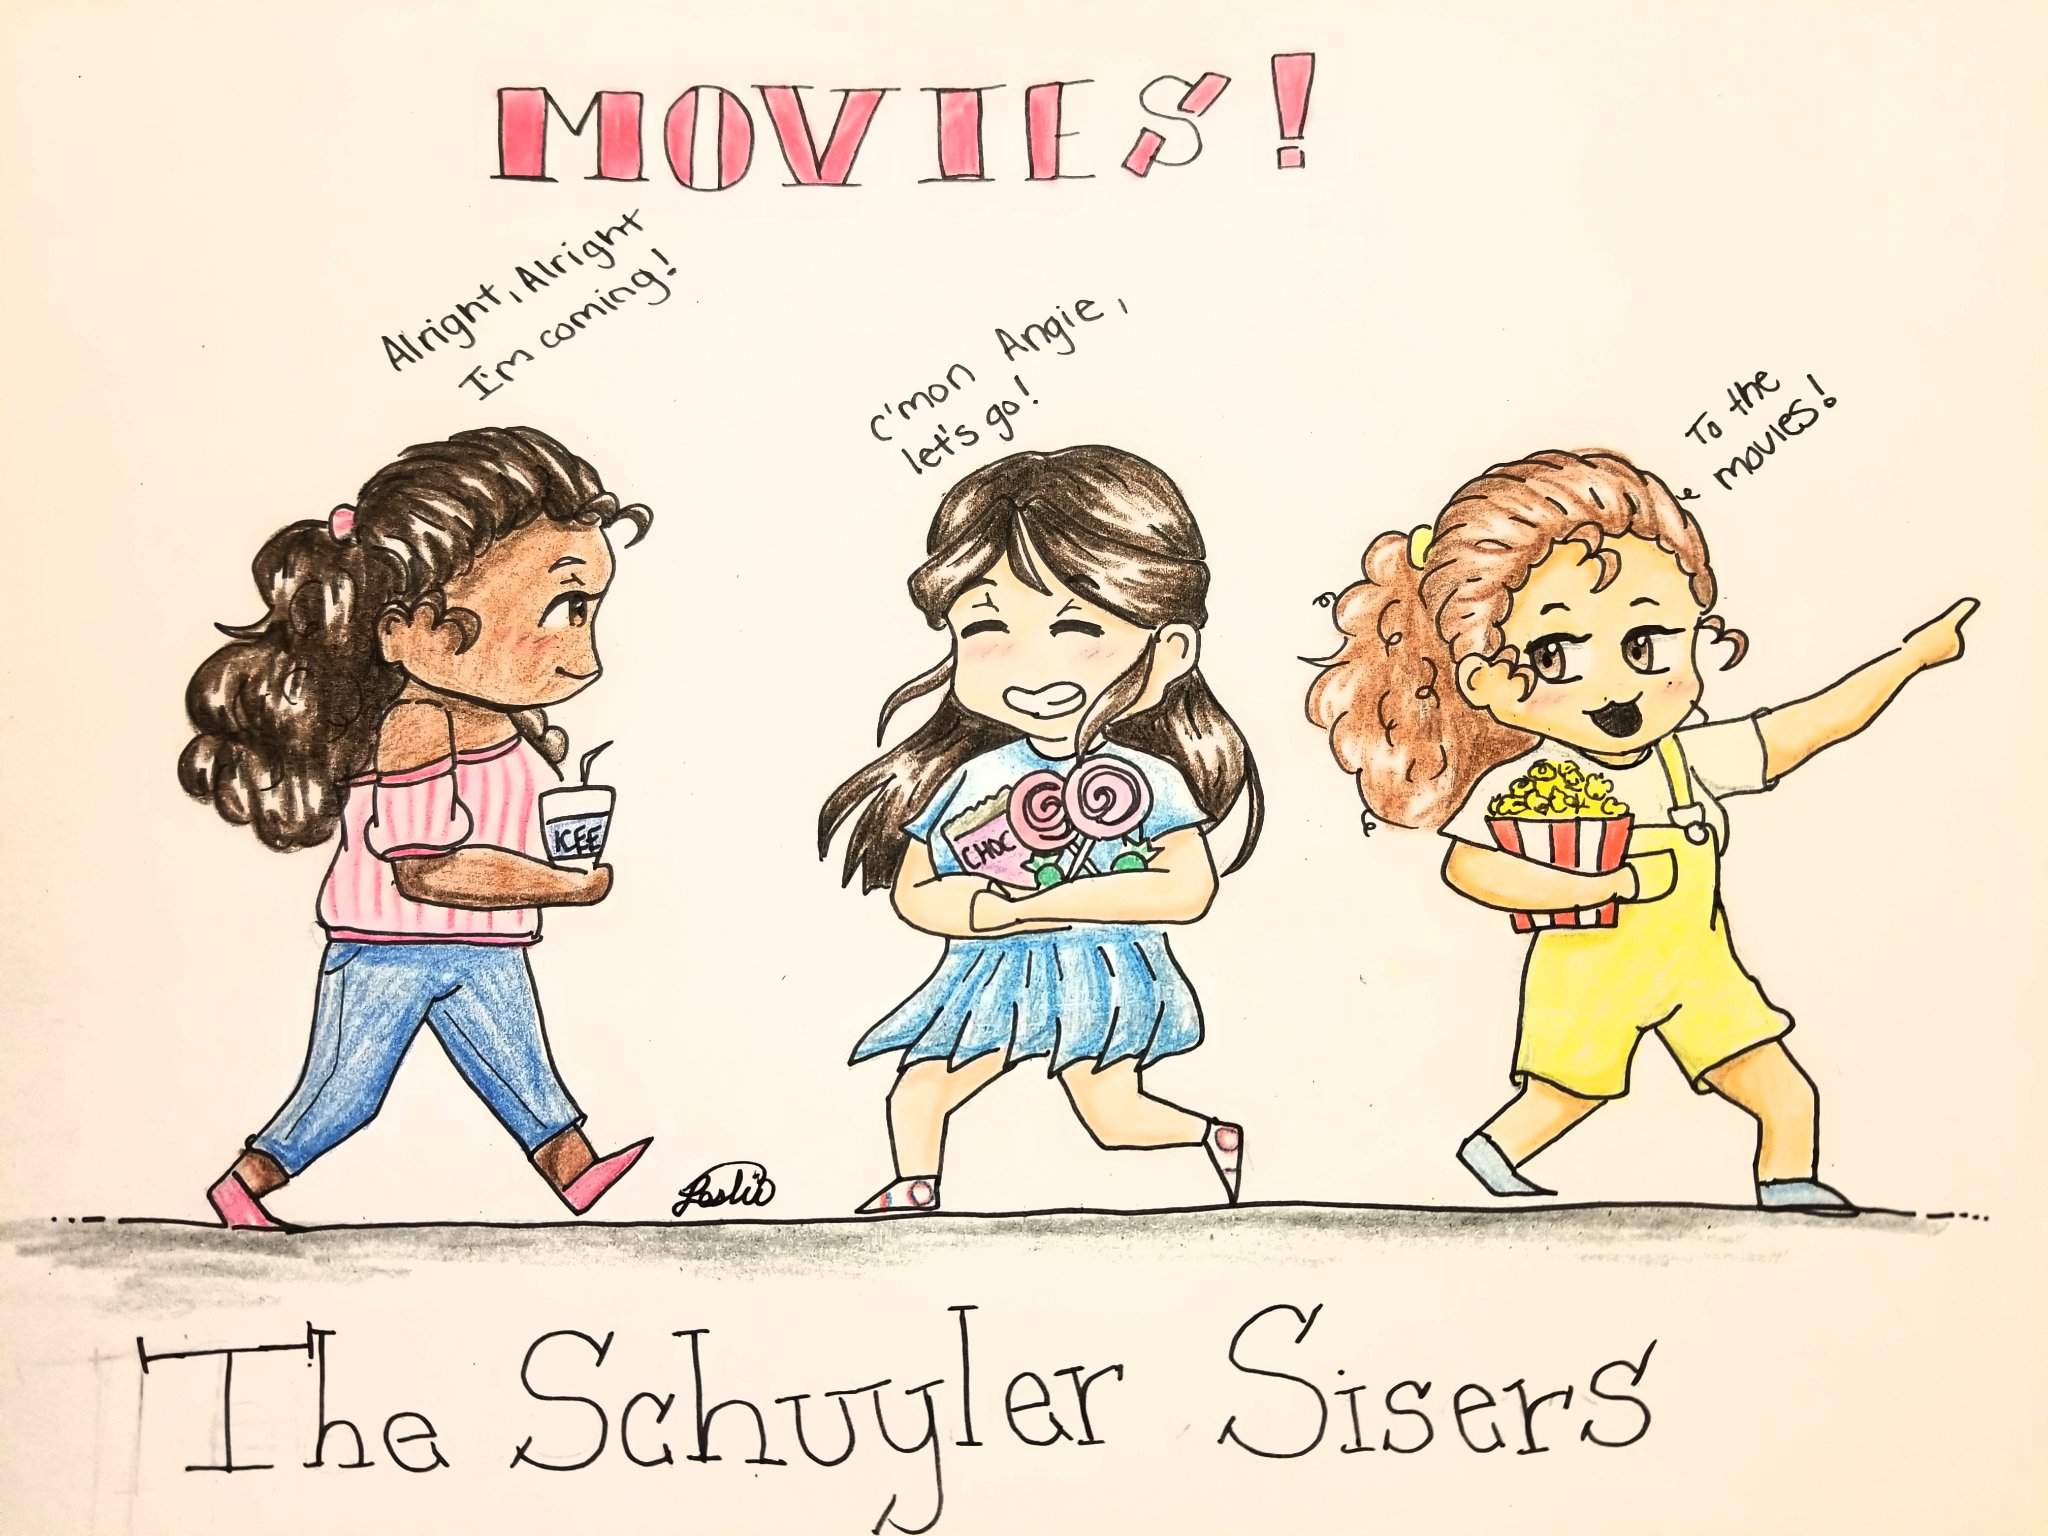 MOVIES WITH THE SCHUYLER SISTERS